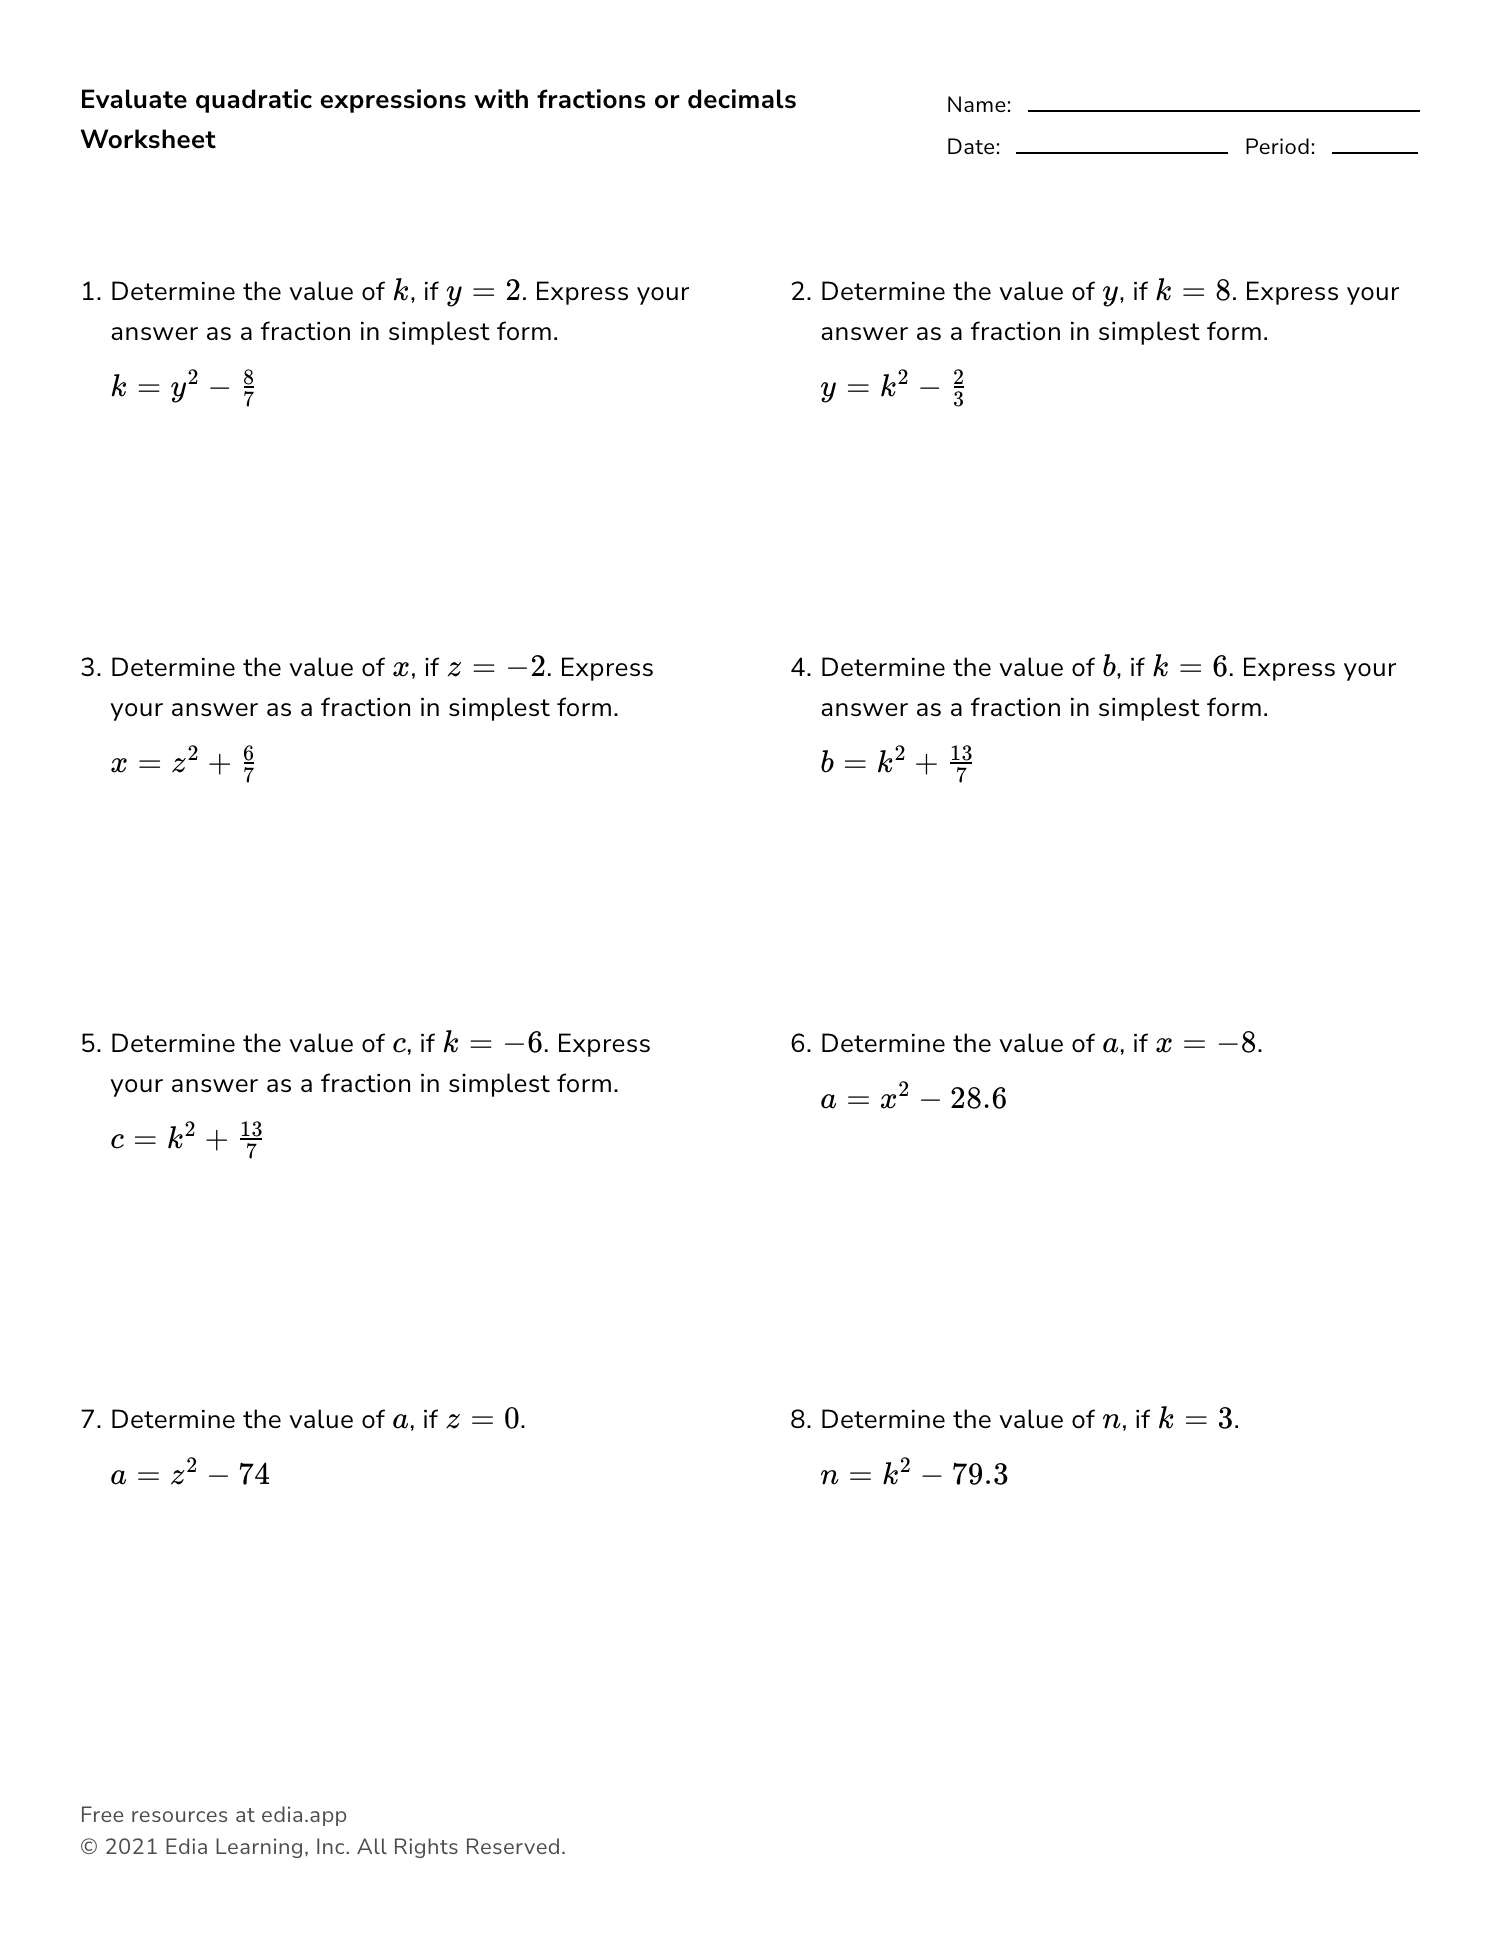 Edia  Free math homework in minutes With Regard To Evaluate The Expression Worksheet